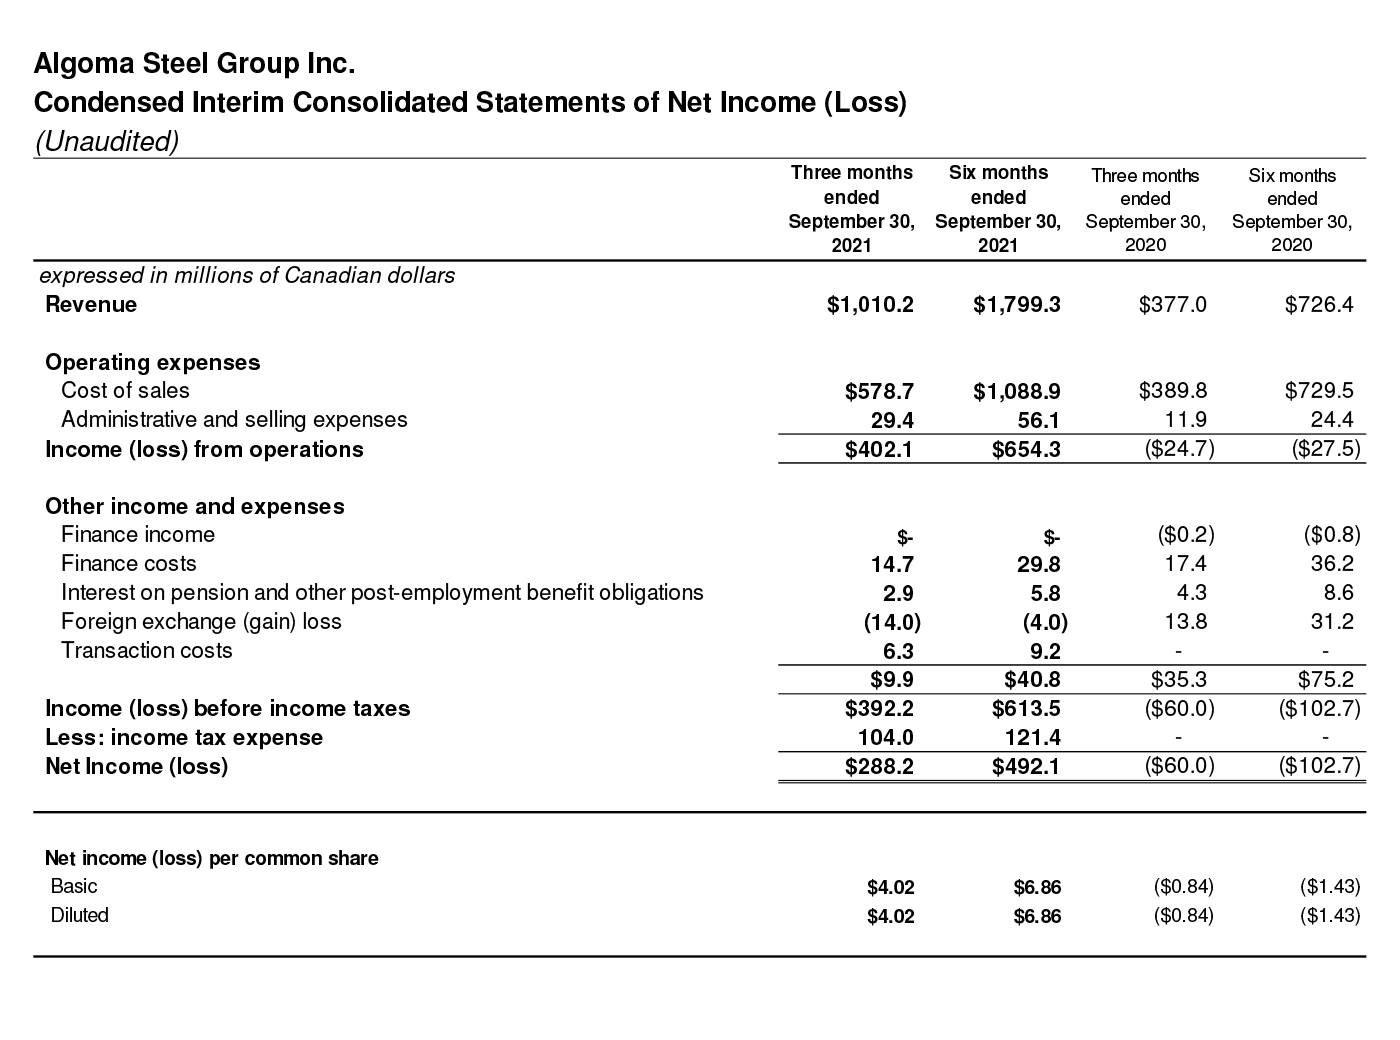 Condensed Interim Consolidated Statements of Net Income (Loss)